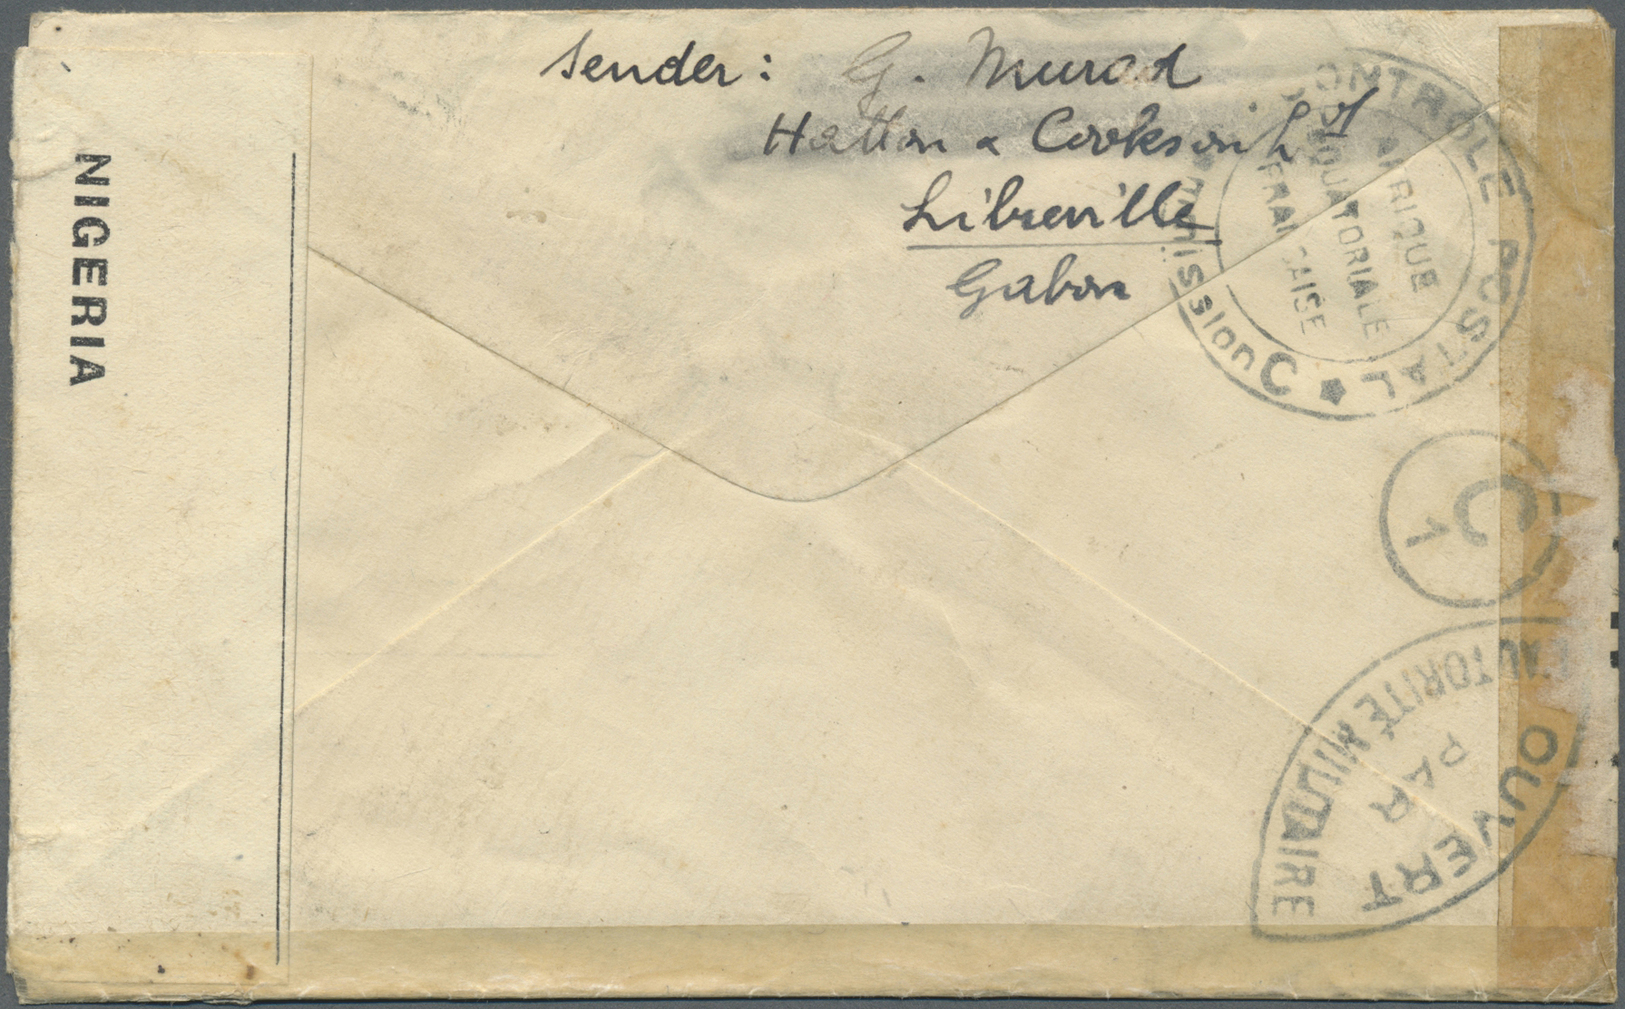 Br Französisch-Äquatorialafrika: 1941. Censored Envelope Written From Libreville, Gabon Addressed To London Bearing A.E. - Covers & Documents